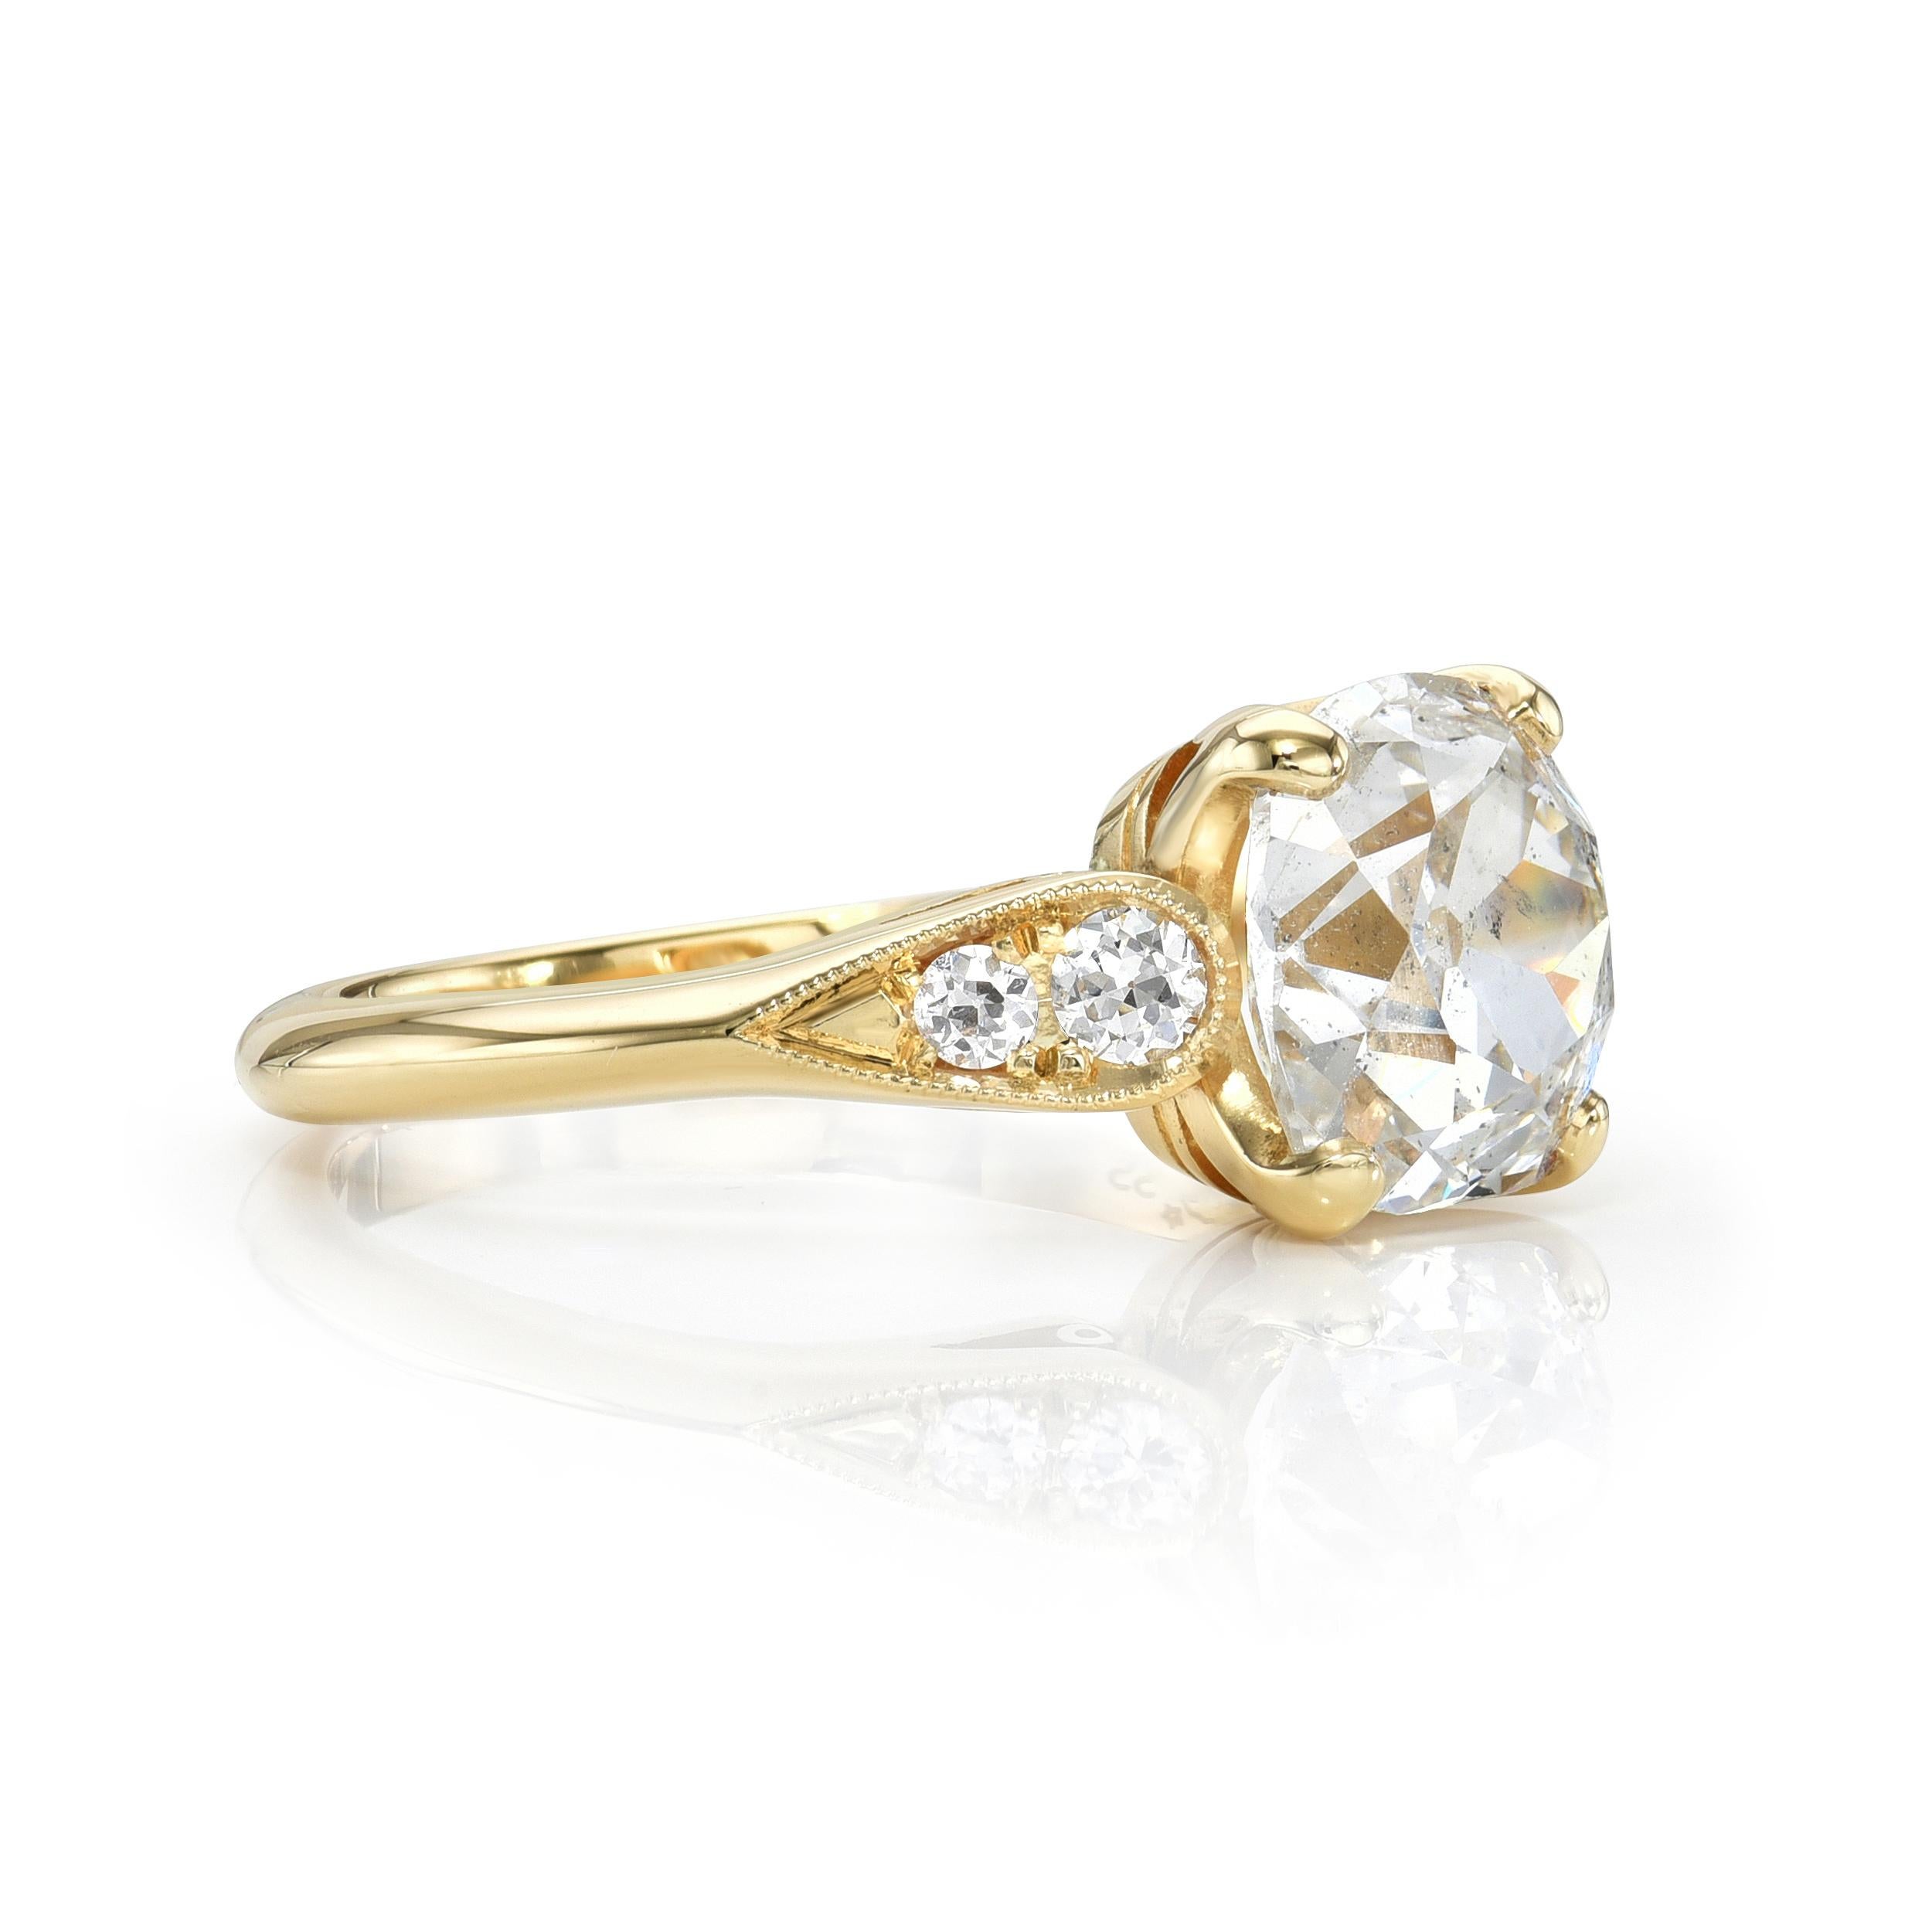 1.99ct F/I2 GIA certified antique cushion cut diamond with 0.14ctw old European cut accent diamonds prong set in a handcrafted 18K yellow gold mounting.